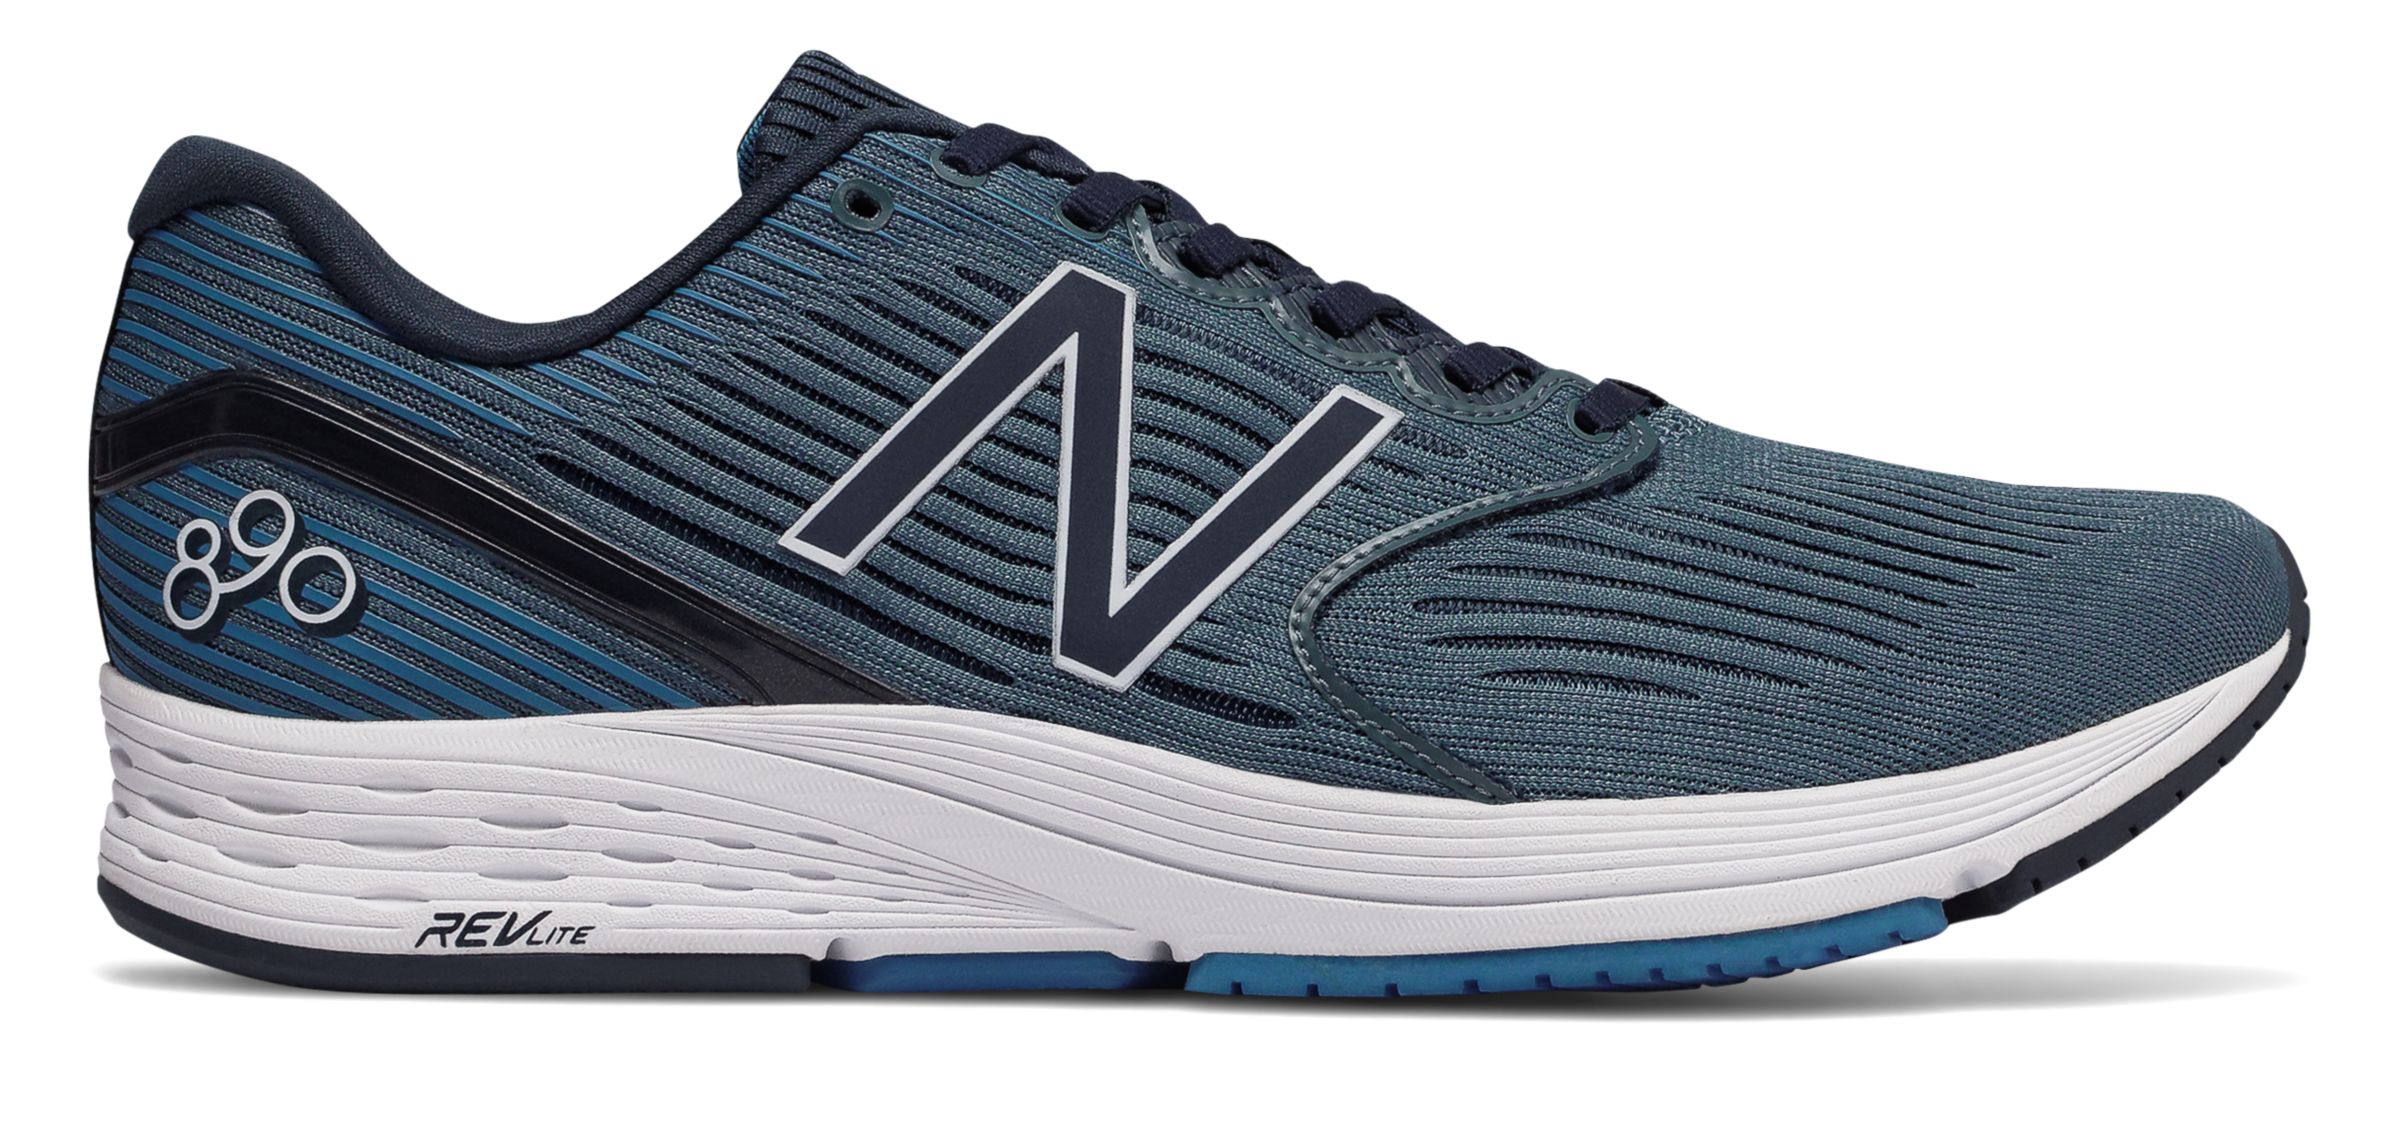 New Balance M890-V6 on Sale - Discounts Up to 40% Off on M890PG6 at Joe's New  Balance Outlet